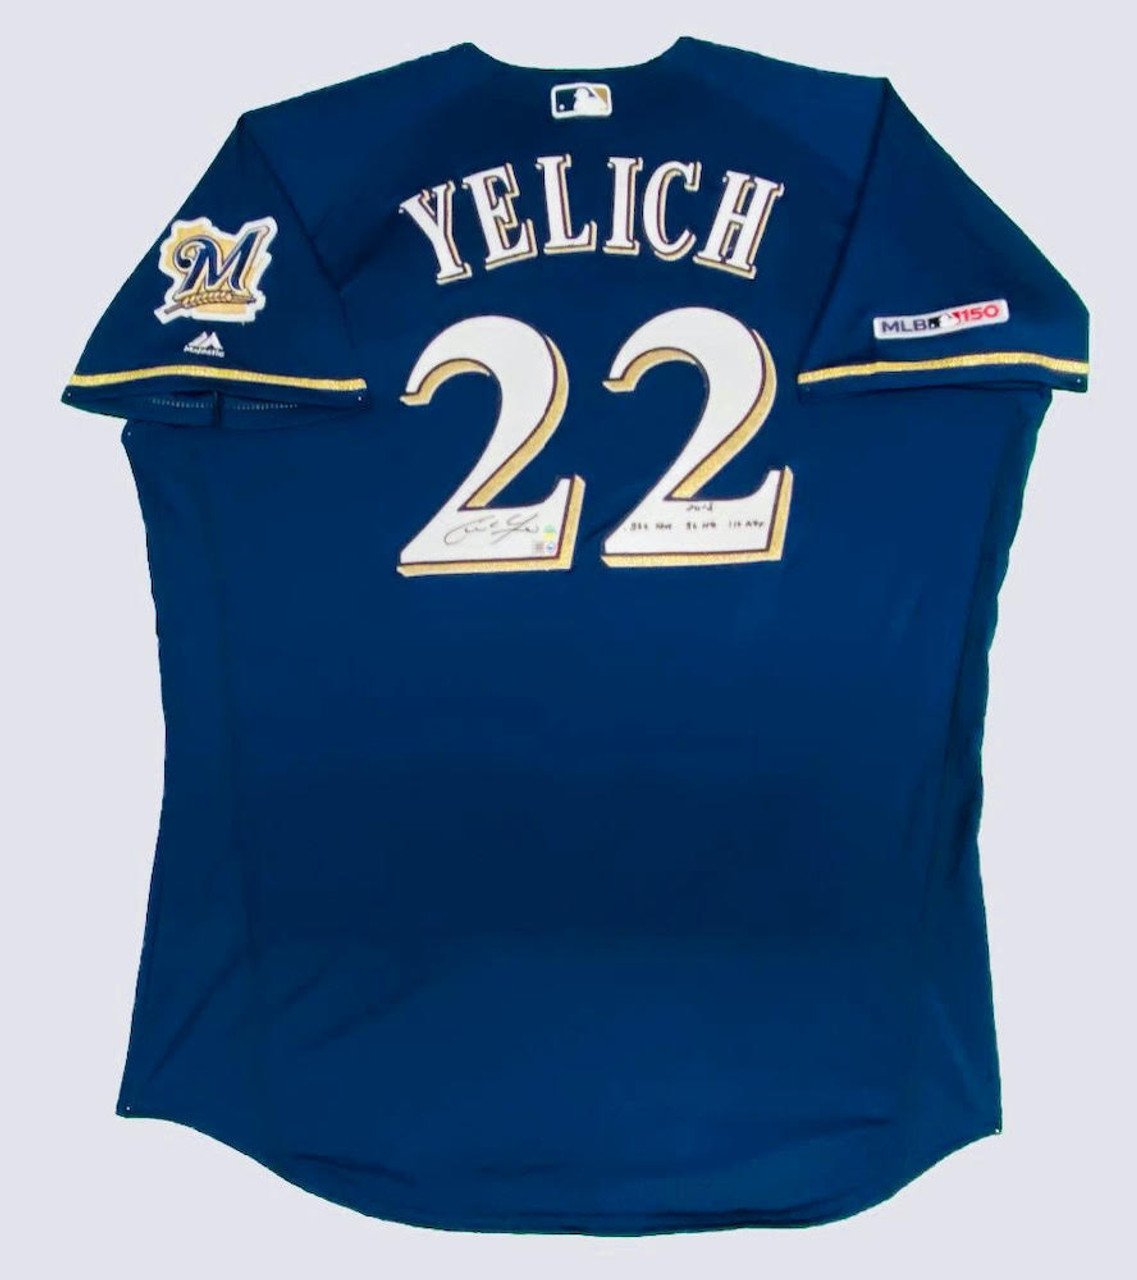 CHRISTIAN YELICH Autographed '2018 Stat' Authentic Blue Brewers Jersey  STEINER - Game Day Legends